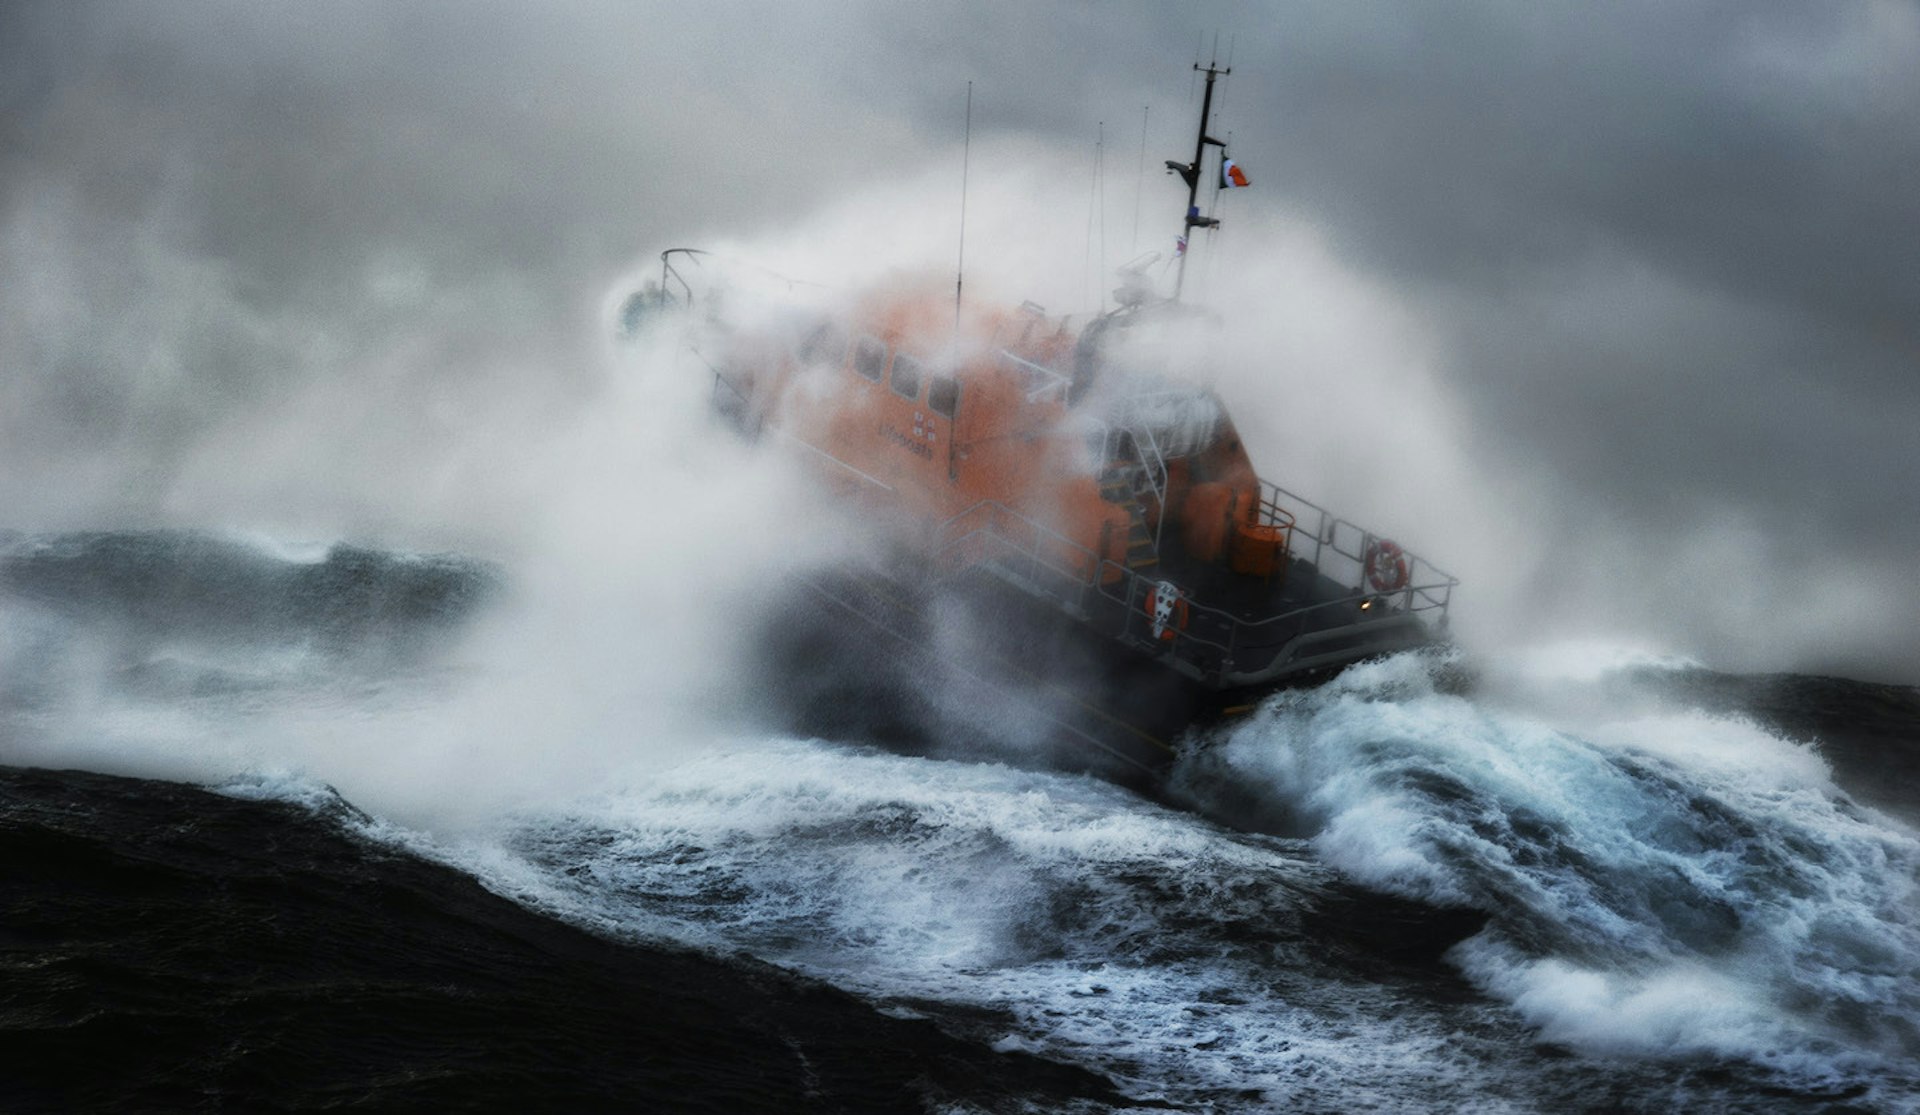 The British lifeboat crews who fight the awesome power of the ocean